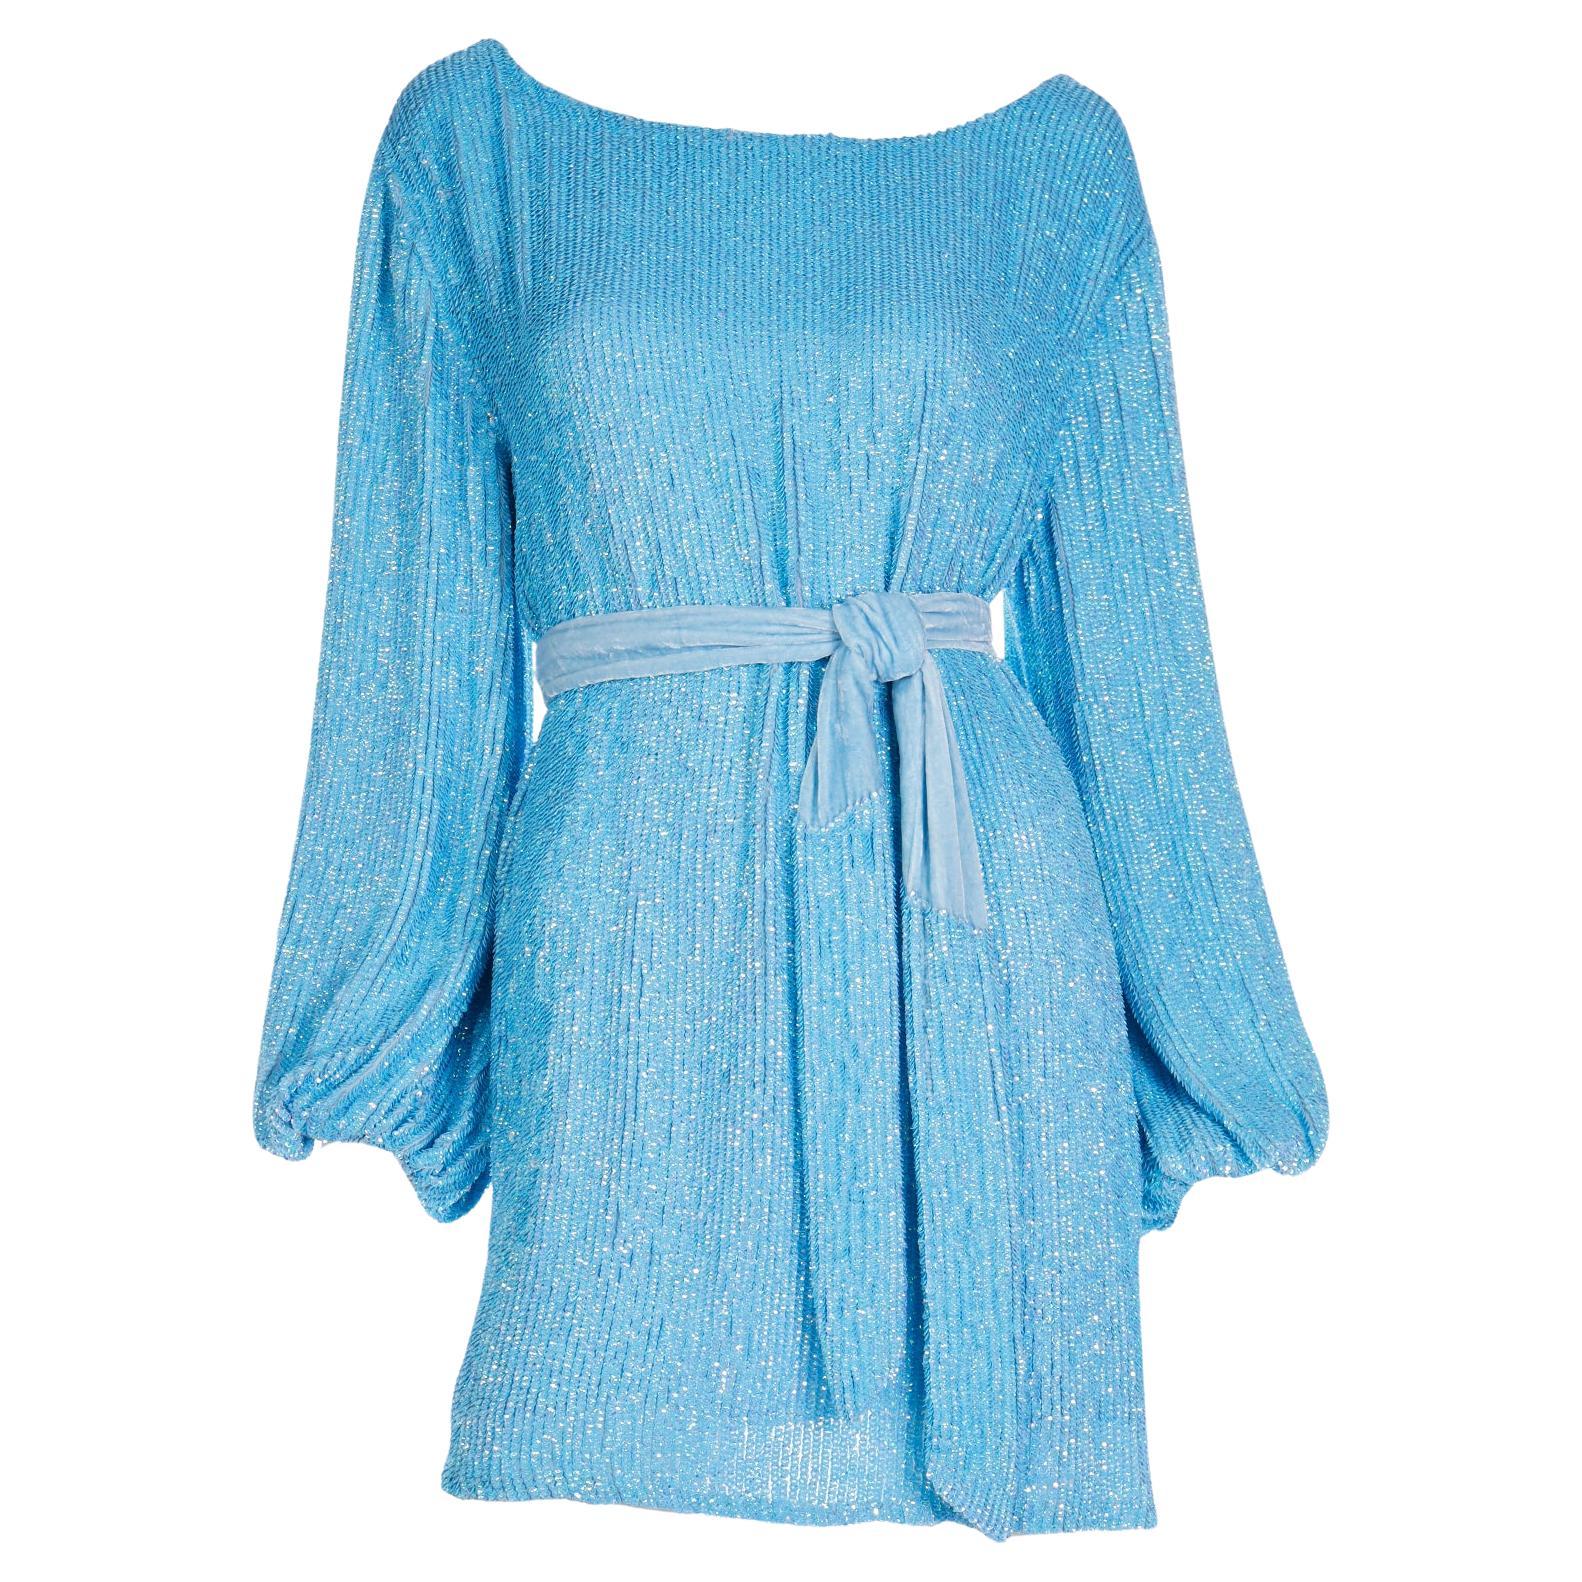 New Retrofete Blue Sequin Mini Dress or Tunic & Sash Belt or Scarf With Tags For Sale